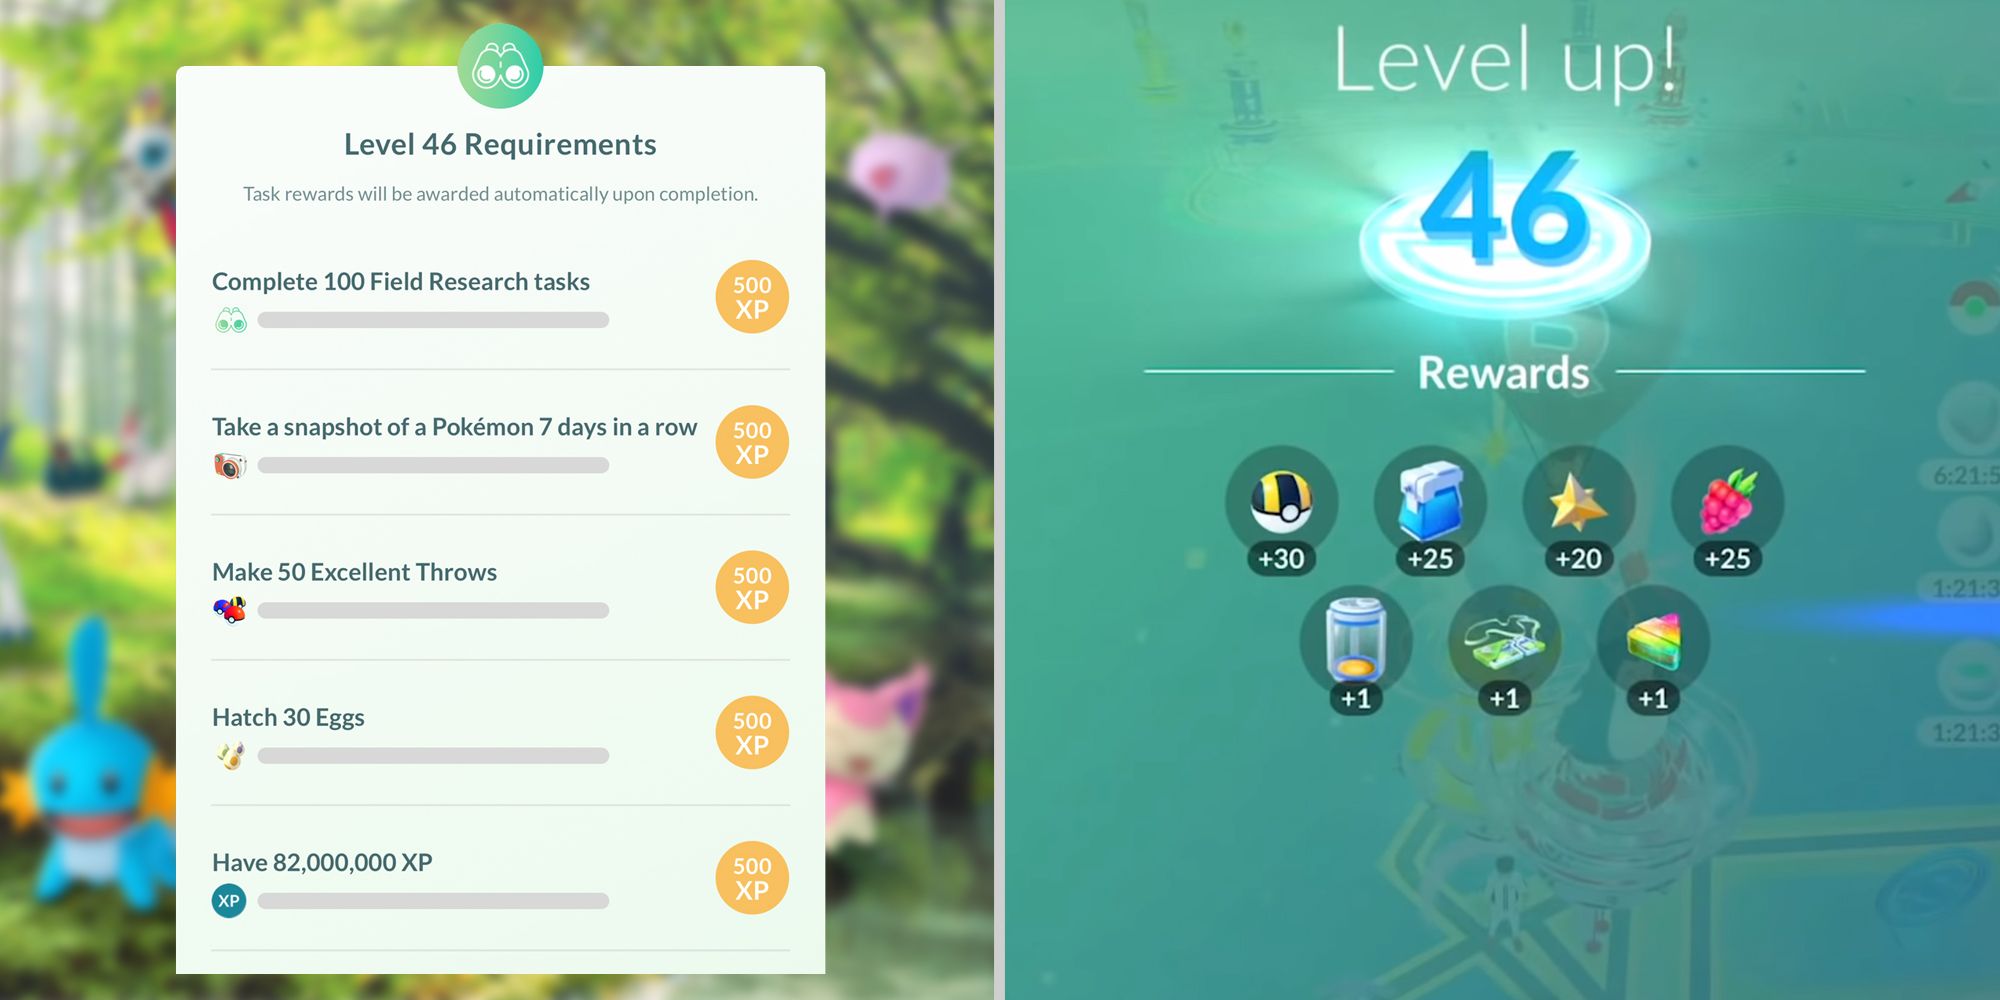 Requirements and rewards for level 46 in Pokemon Go